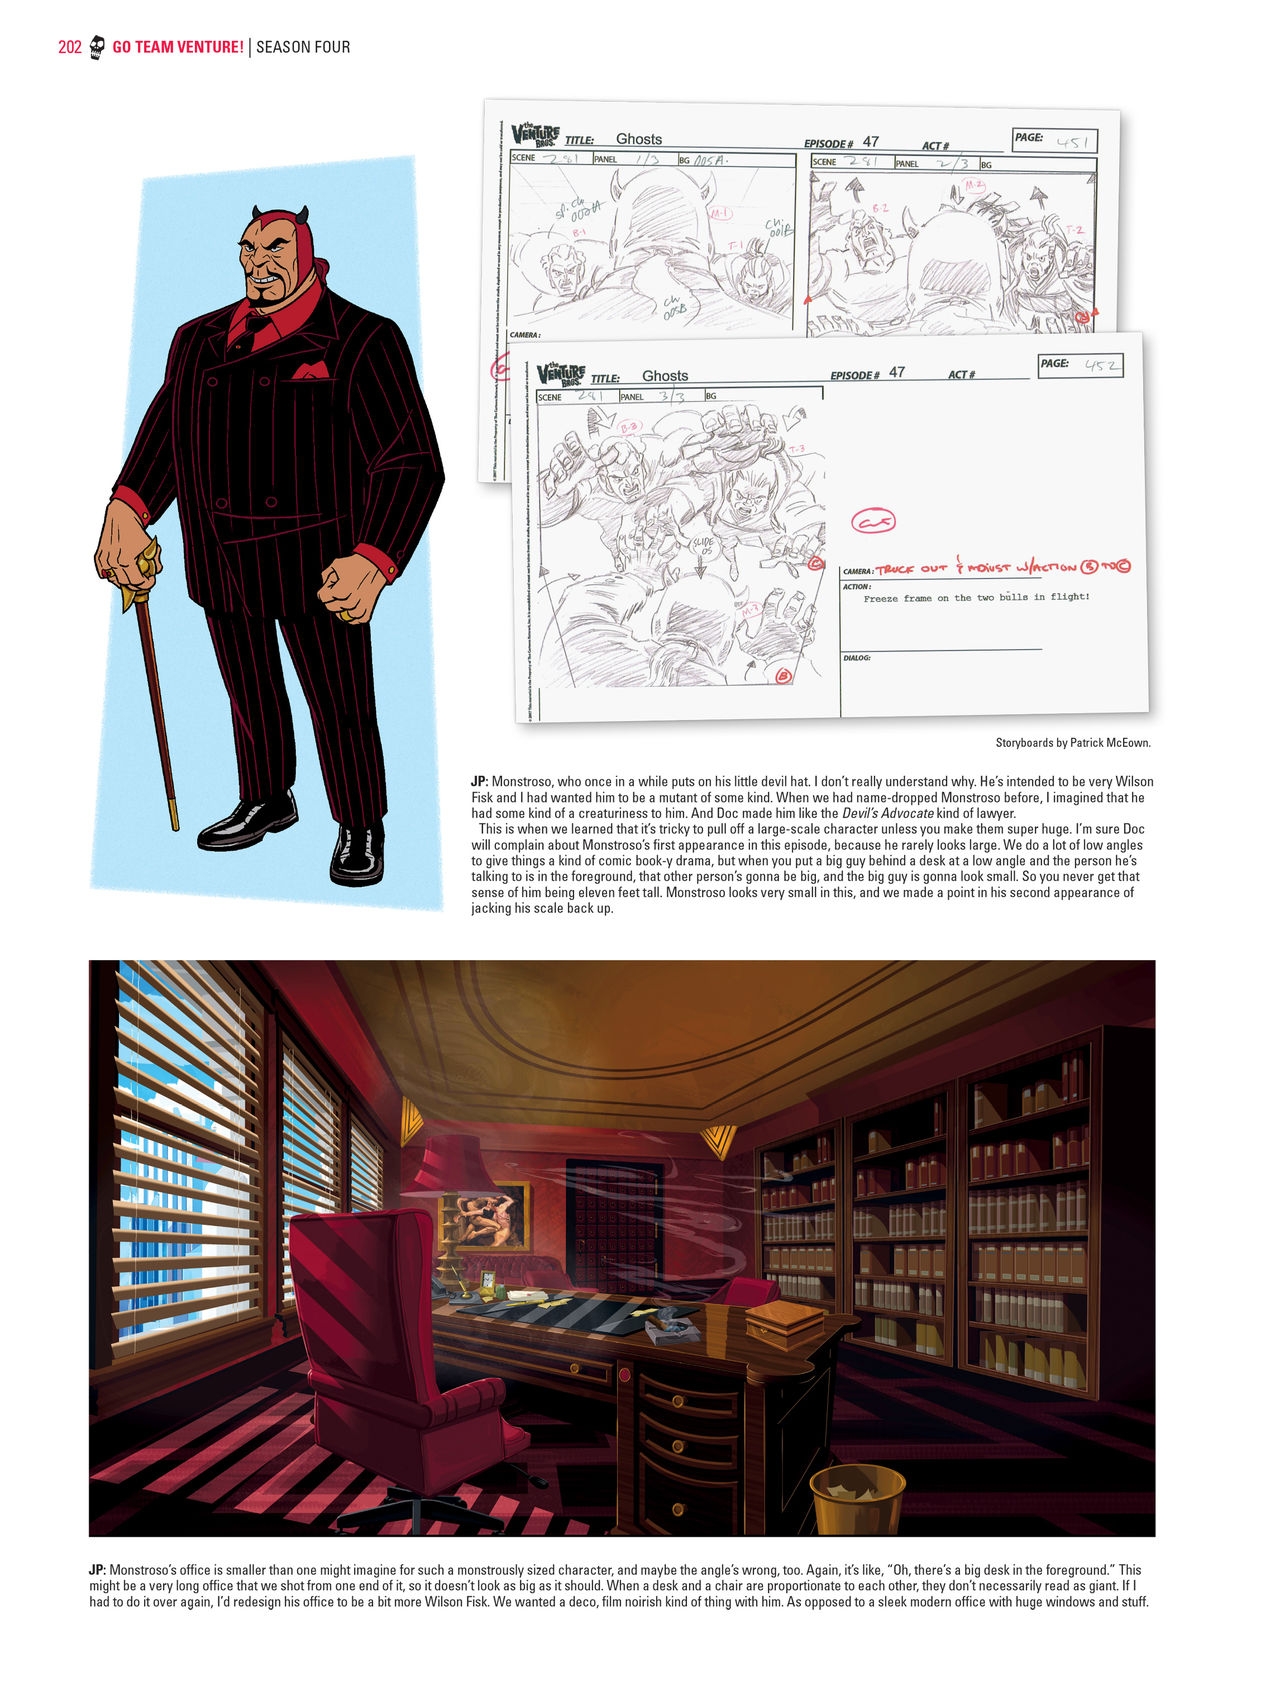 Go Team Venture! - The Art and Making of the Venture Bros 200